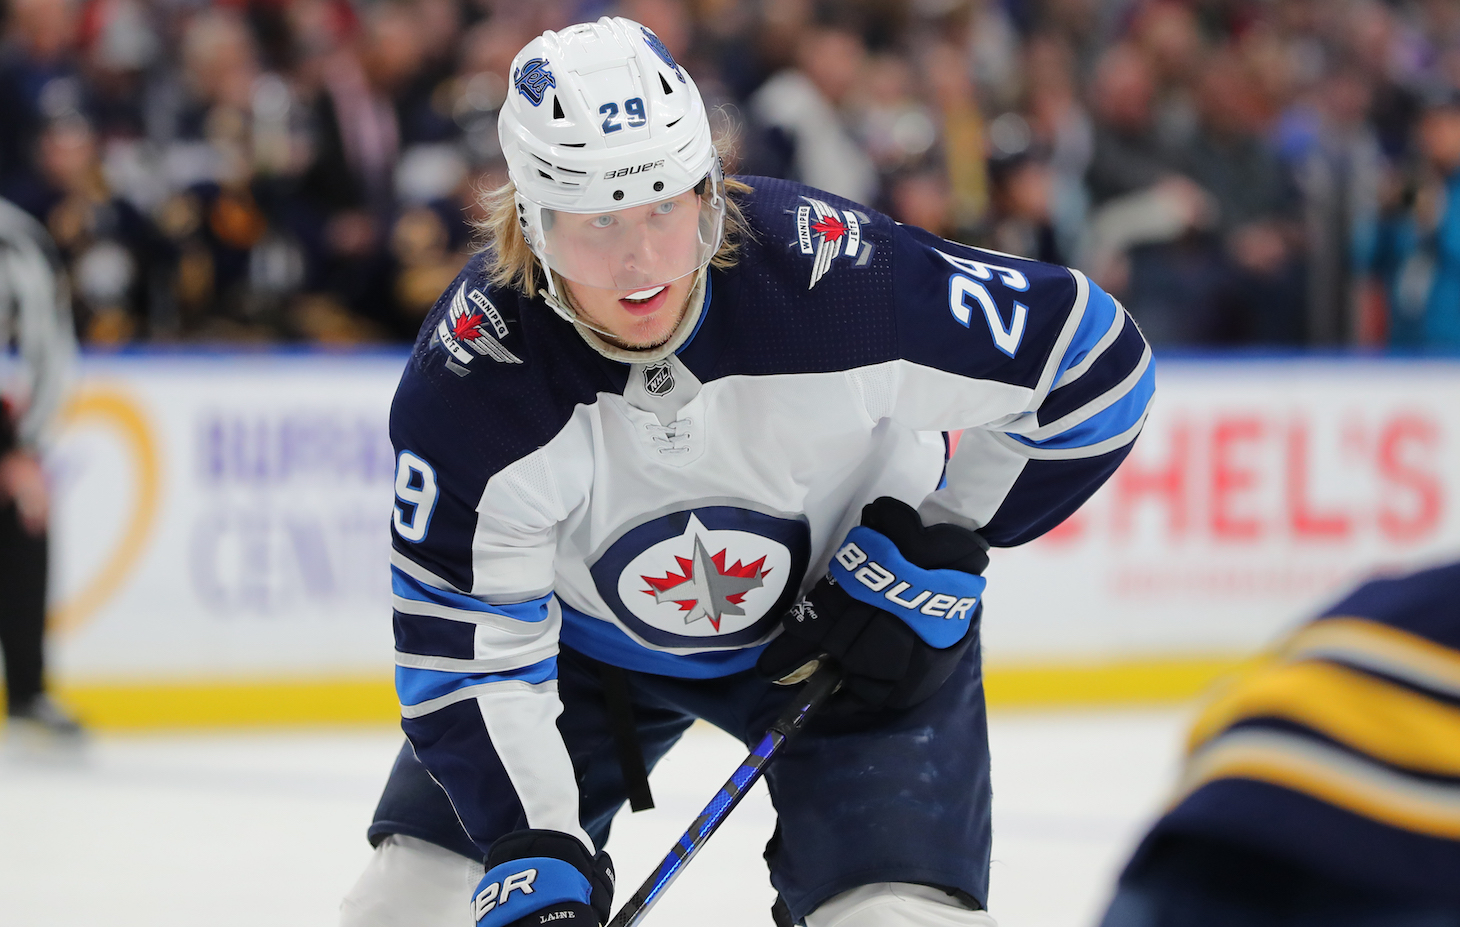 BUFFALO, NY - FEBRUARY 23: Patrik Laine #29 of the Winnipeg Jets during a game against the Buffalo Sabres at KeyBank Center on February 23, 2020 in Buffalo, New York. (Photo by Timothy T Ludwig/Getty Images)